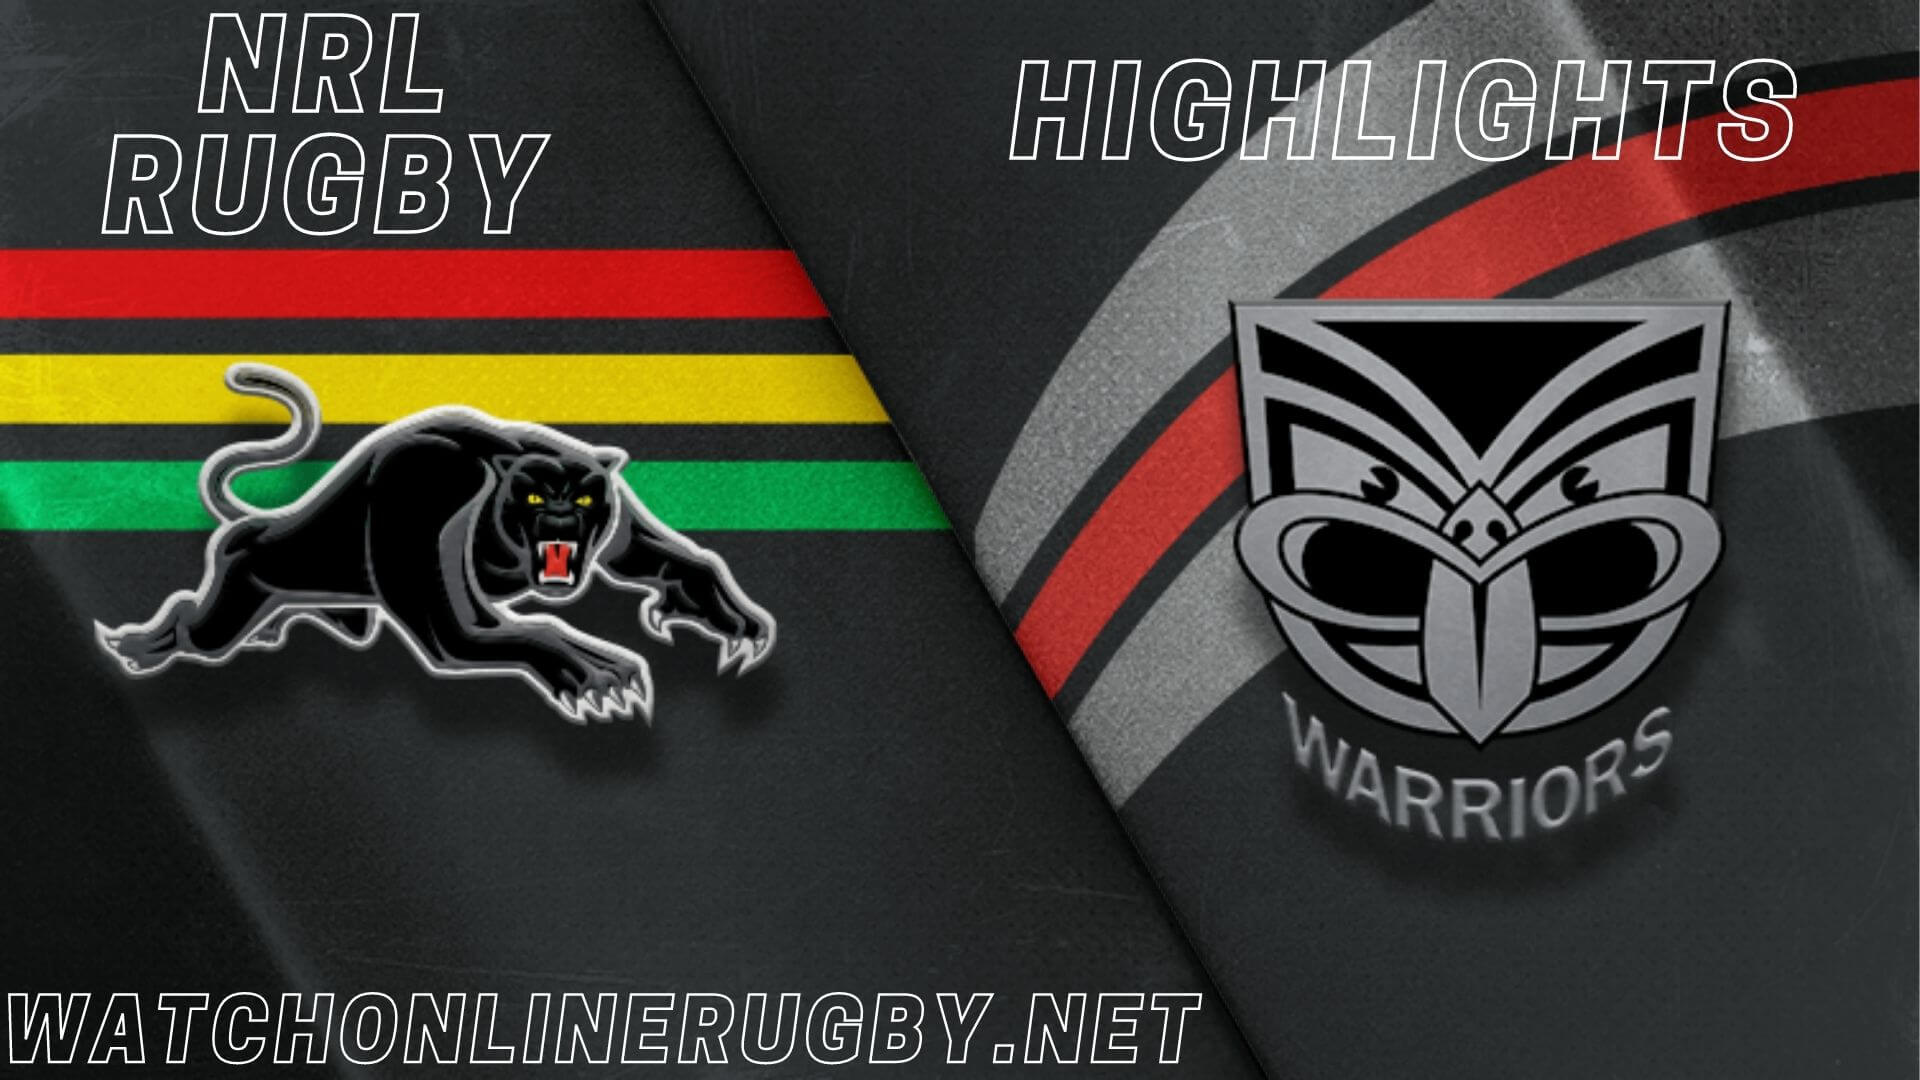 Warriors Vs Panthers Highlights RD 15 NRL Rugby